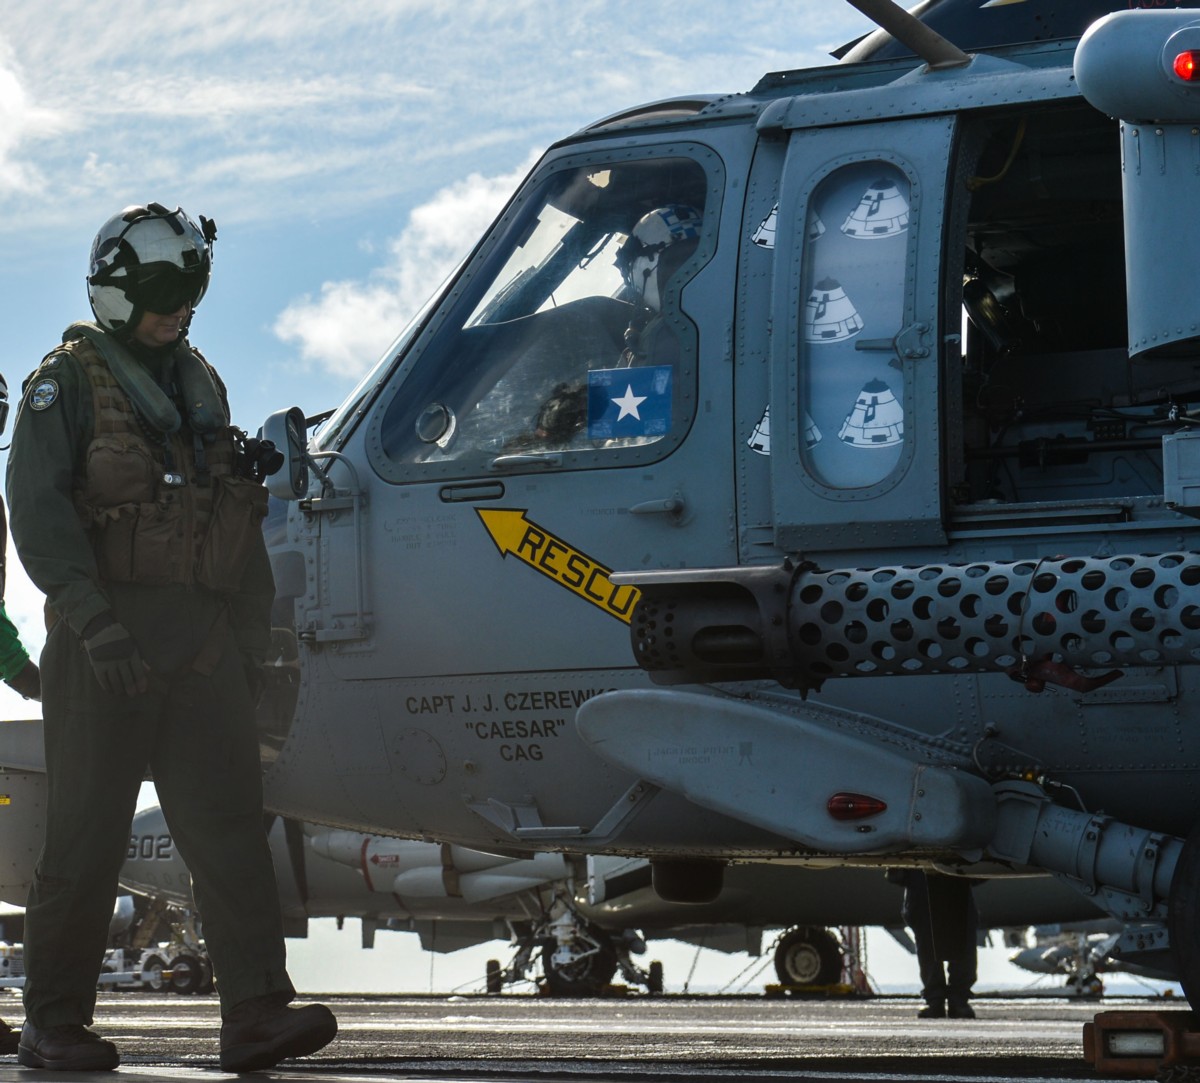 hsc-4 black knights helicopter sea combat squadron us navy mh-60s seahawk 2014 15 gatling machine gun